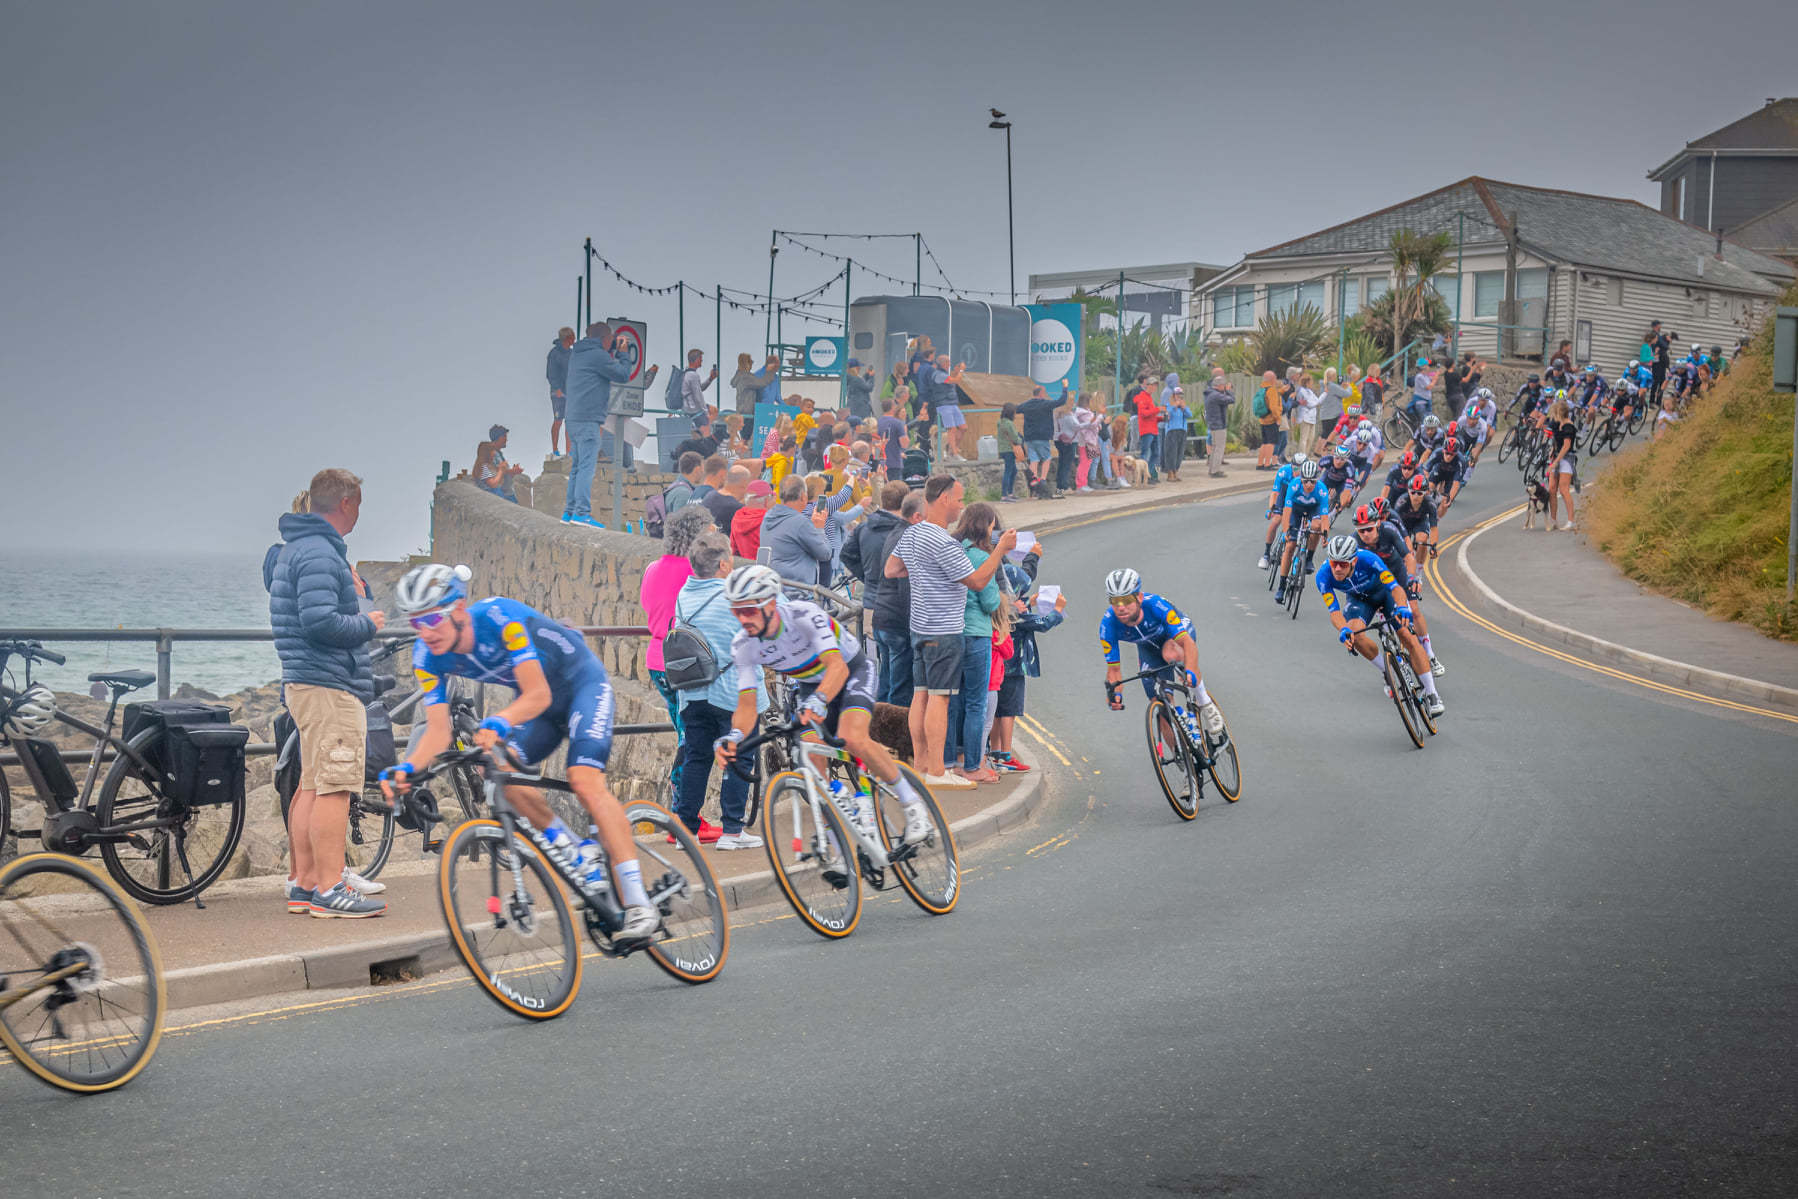 The riders negotiate the hill at Falmouths Swanpool Beach Picture: Mark Quilter/Packet Camera Club